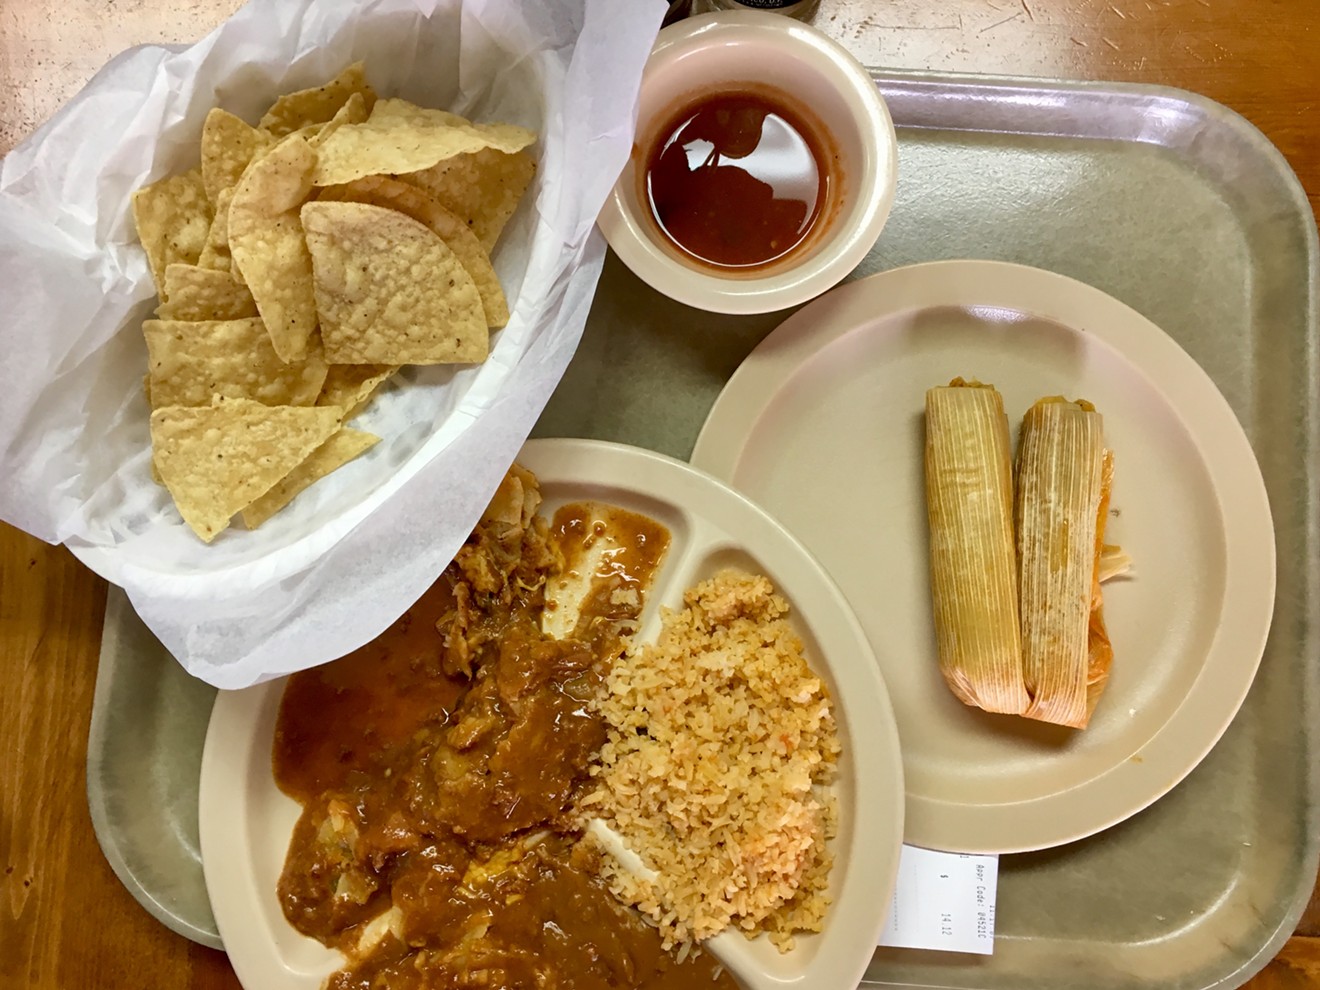 Morning tamales and salsa in a paper cup at the all-you-can-eat cafeteria.